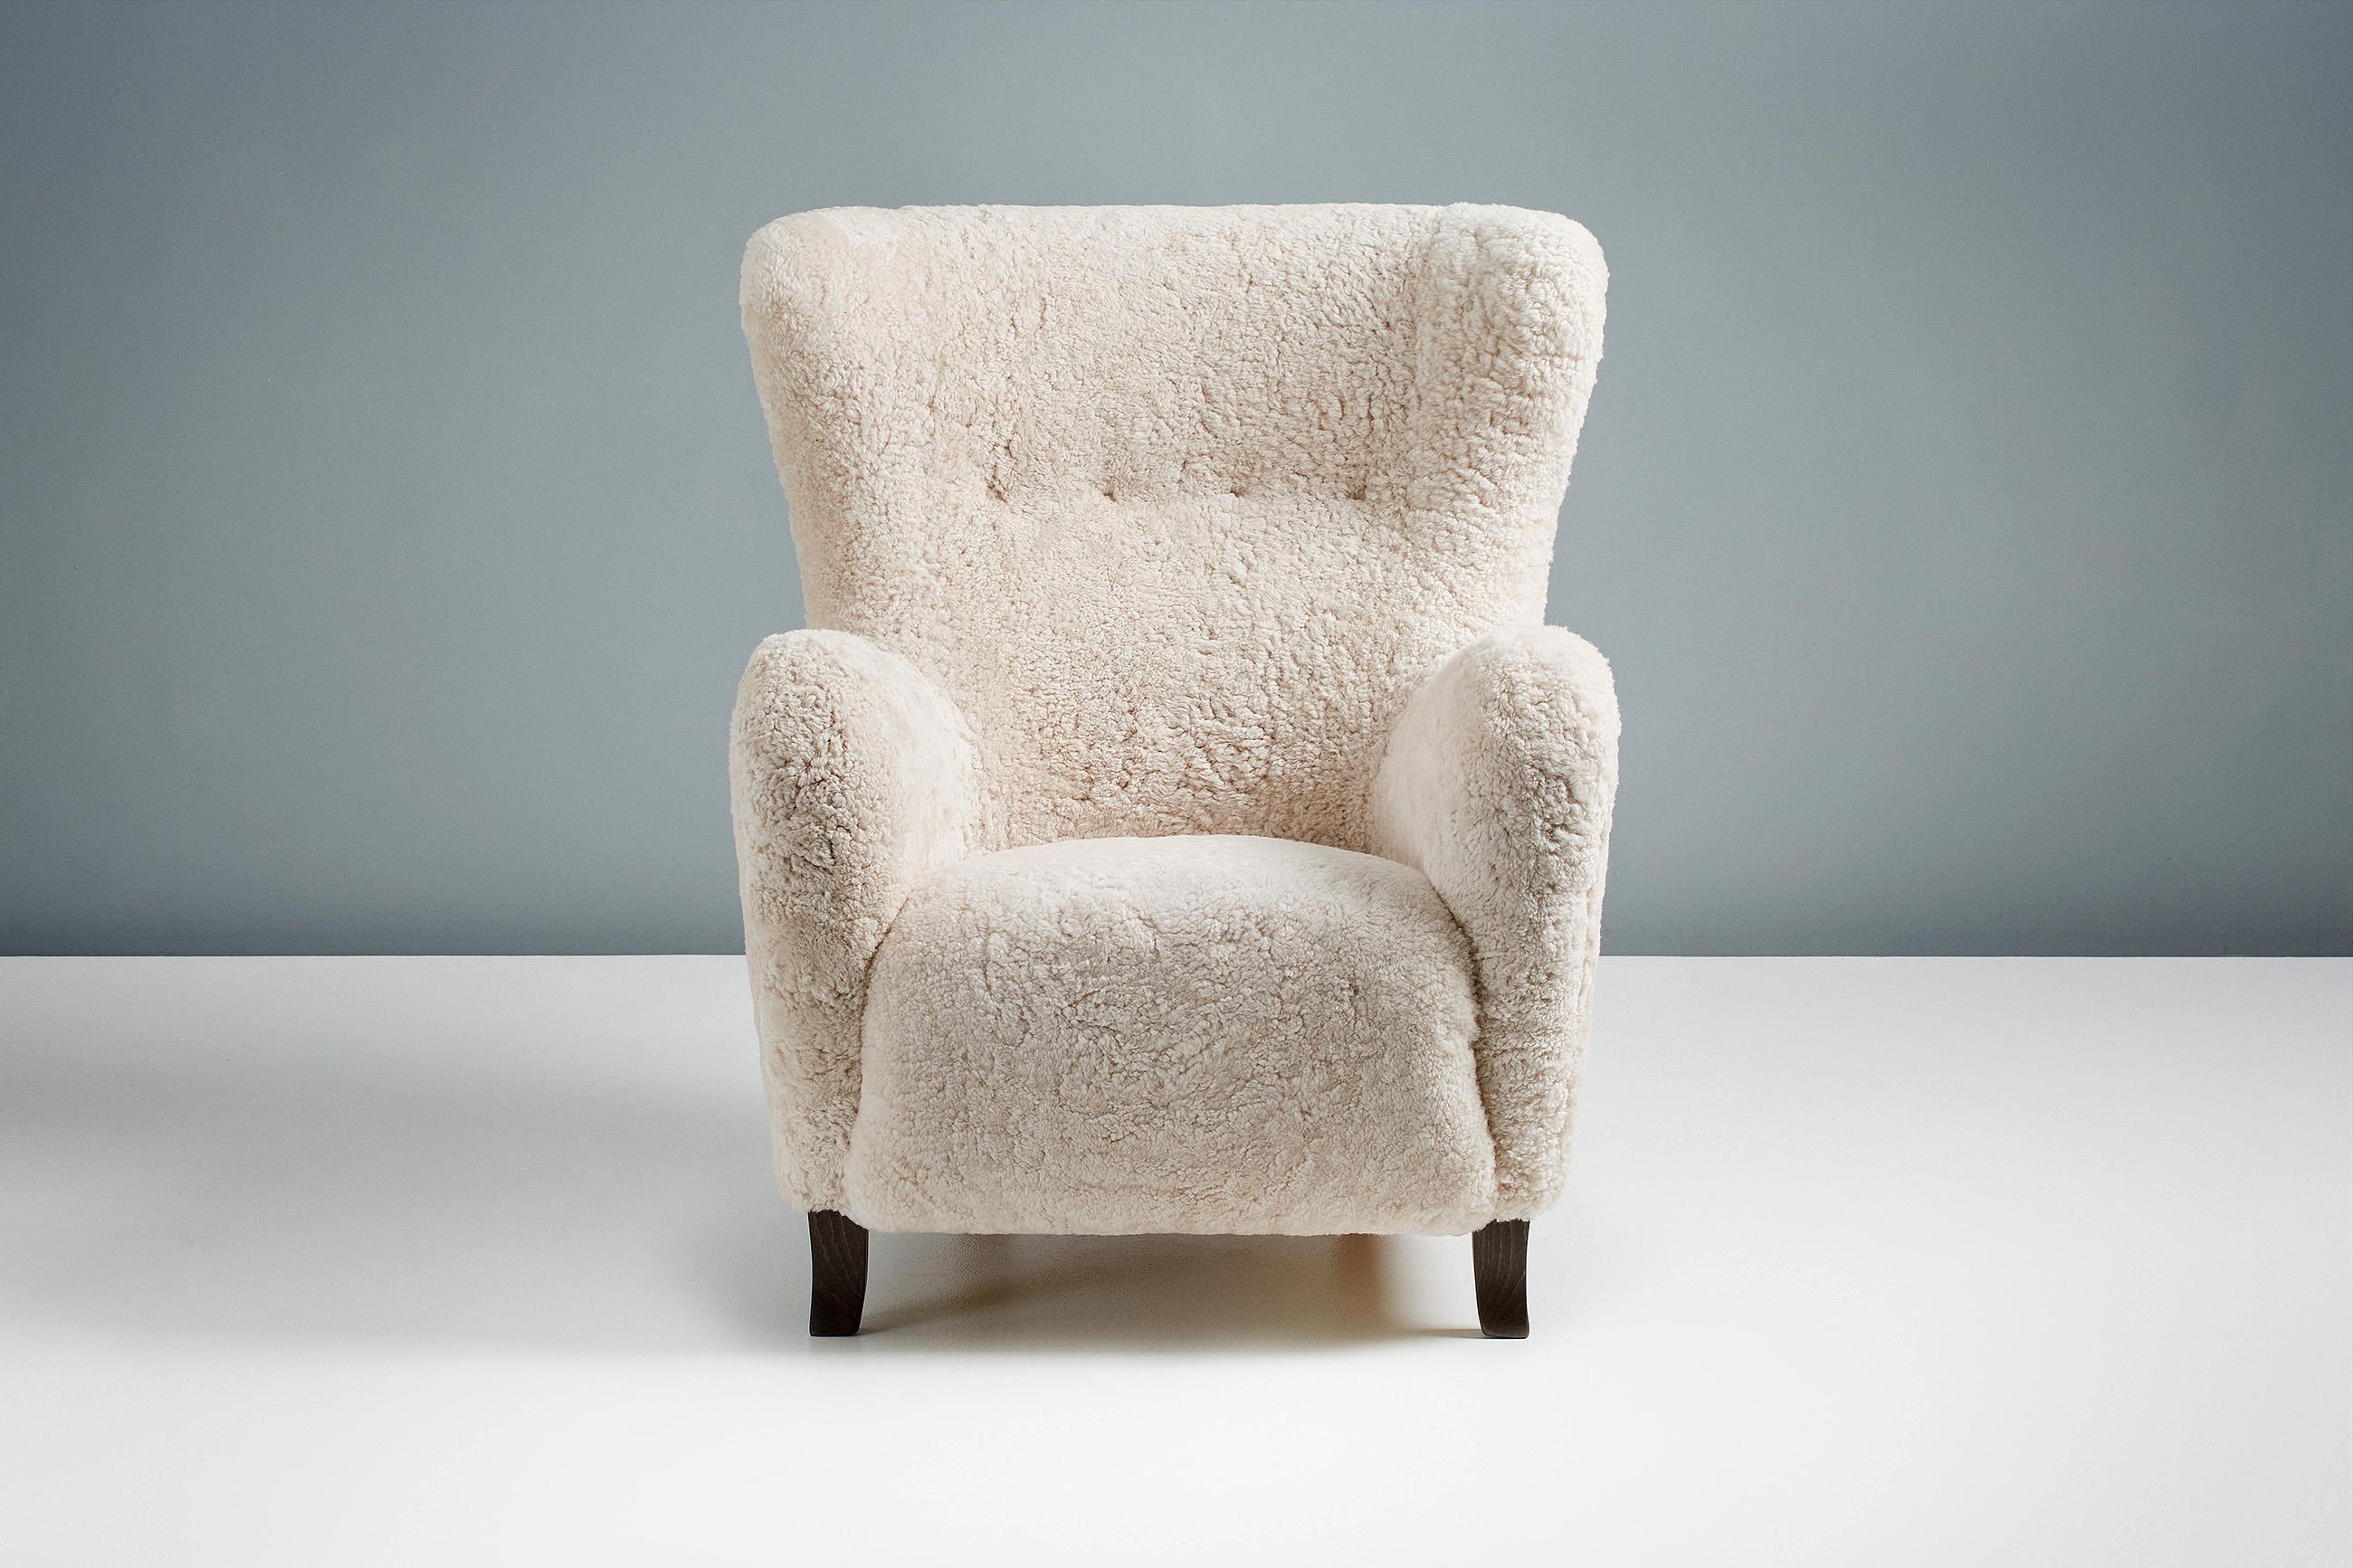 Dagmar Design - Sampo Wing Chair

The Sampo wing chair is from the Dagmar Design custom-made upholstered range. This piece has been developed and hand-made at our workshops in London using the highest quality materials. The frame is constructed from